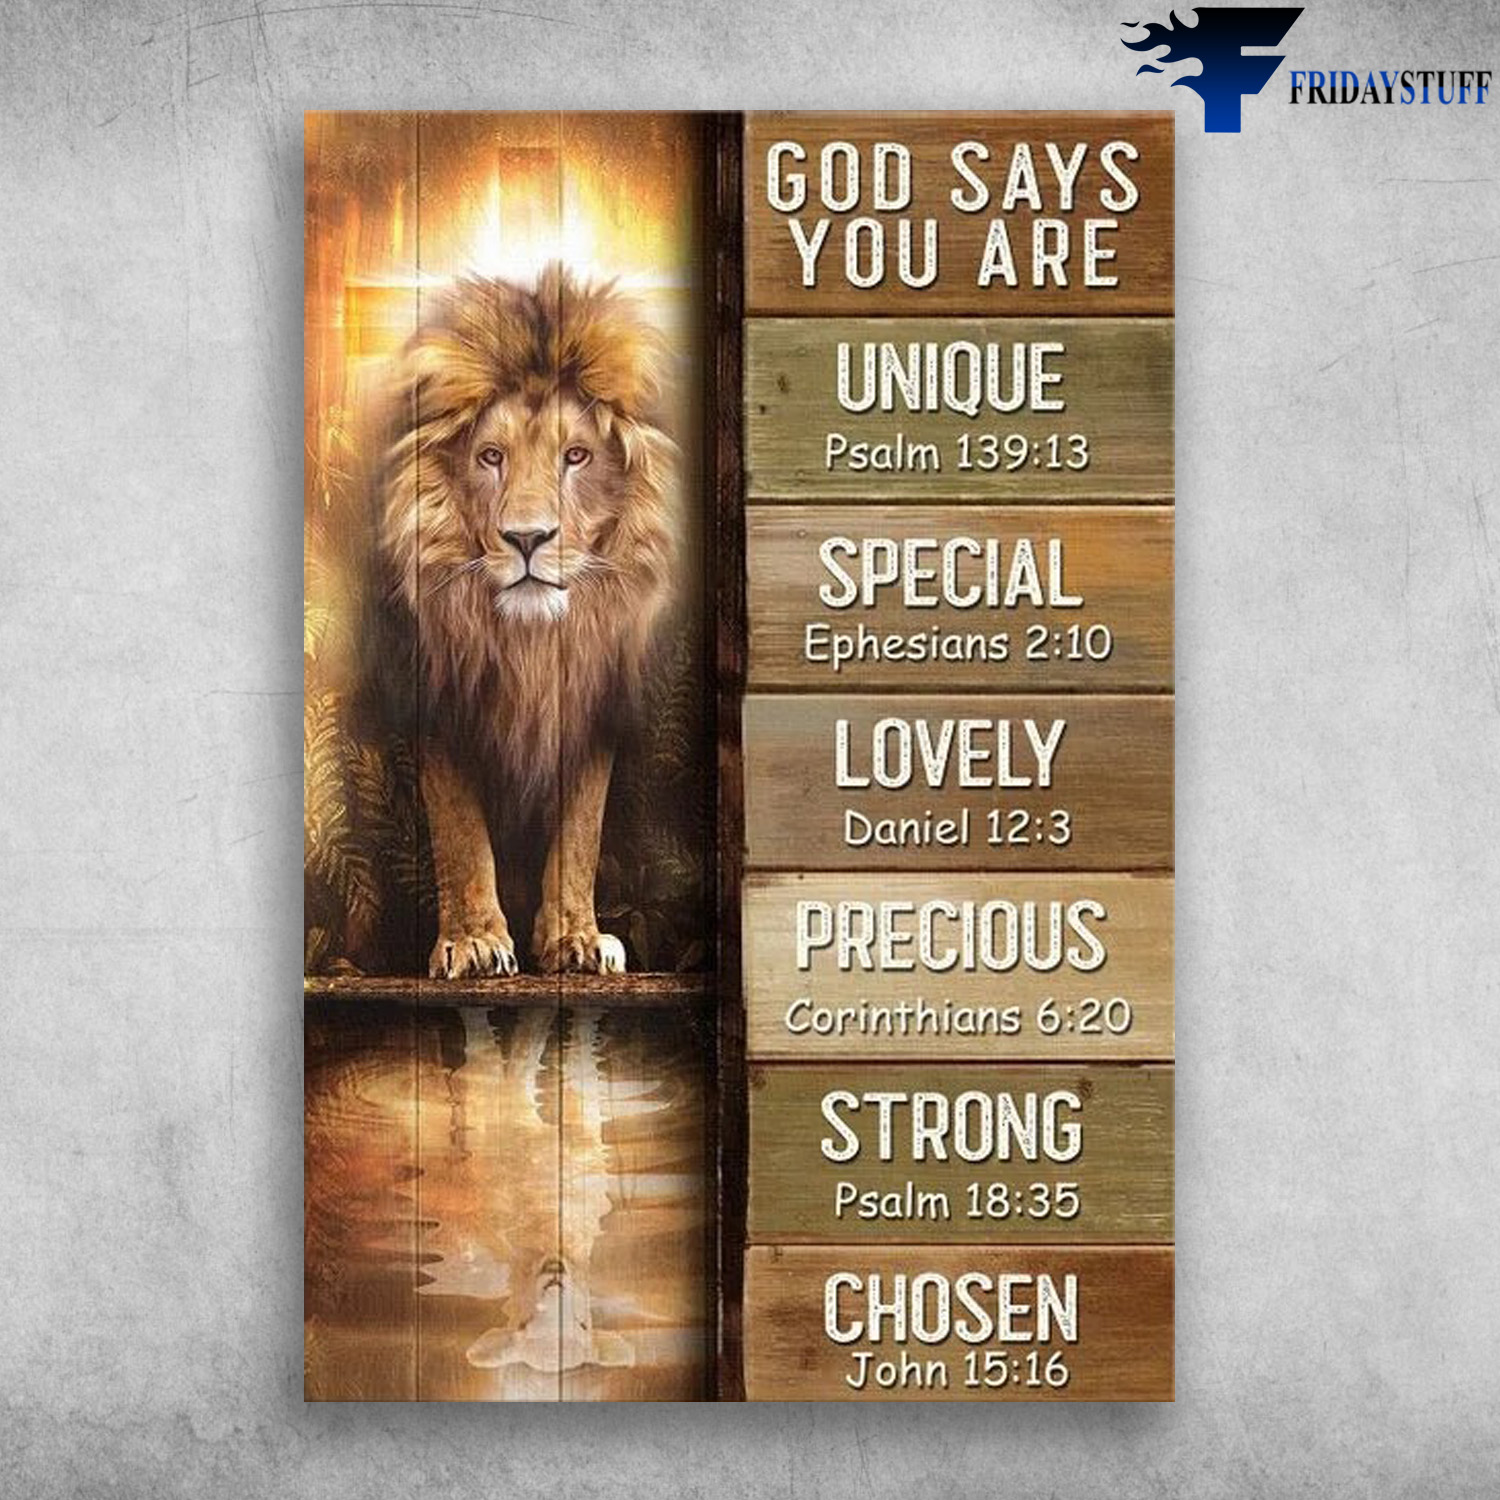 Lion And Goat - God Says You Are Unique, Special, Lovely, Precious, Strong, Chosen